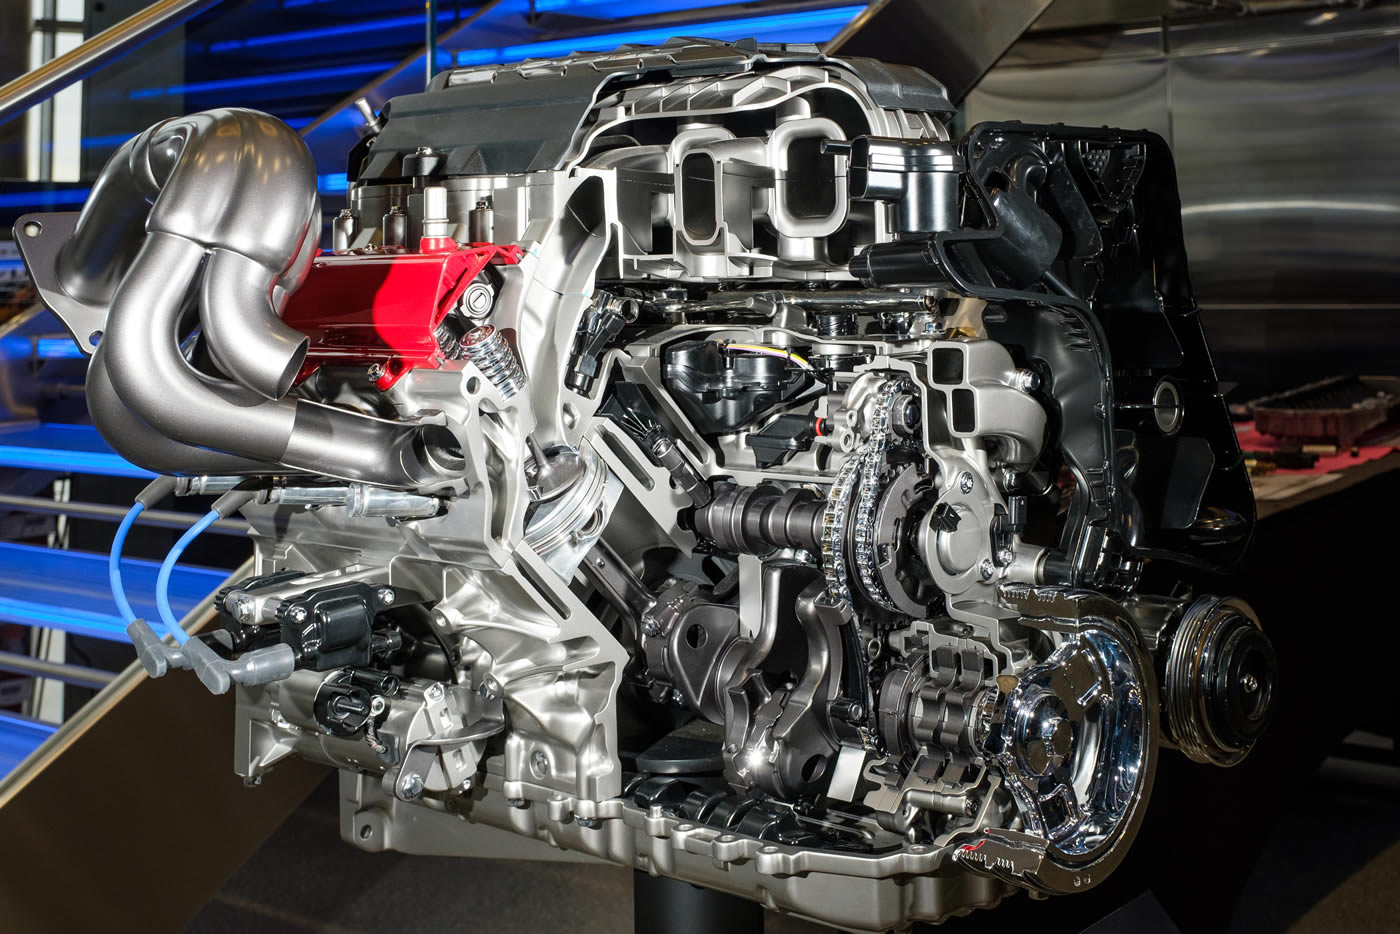 A cut-away version of the LT2 6.2L V-8 engine for the 2020 Corvette Stingray. The new mid-engine Corvette featuring the LT2 and dual-clutch transmission can reach 60 mph in 2.9 seconds and cross the quarter mile mark in 11.2 seconds at 121 mph. (Photo by Steve Fecht for Chevrolet).